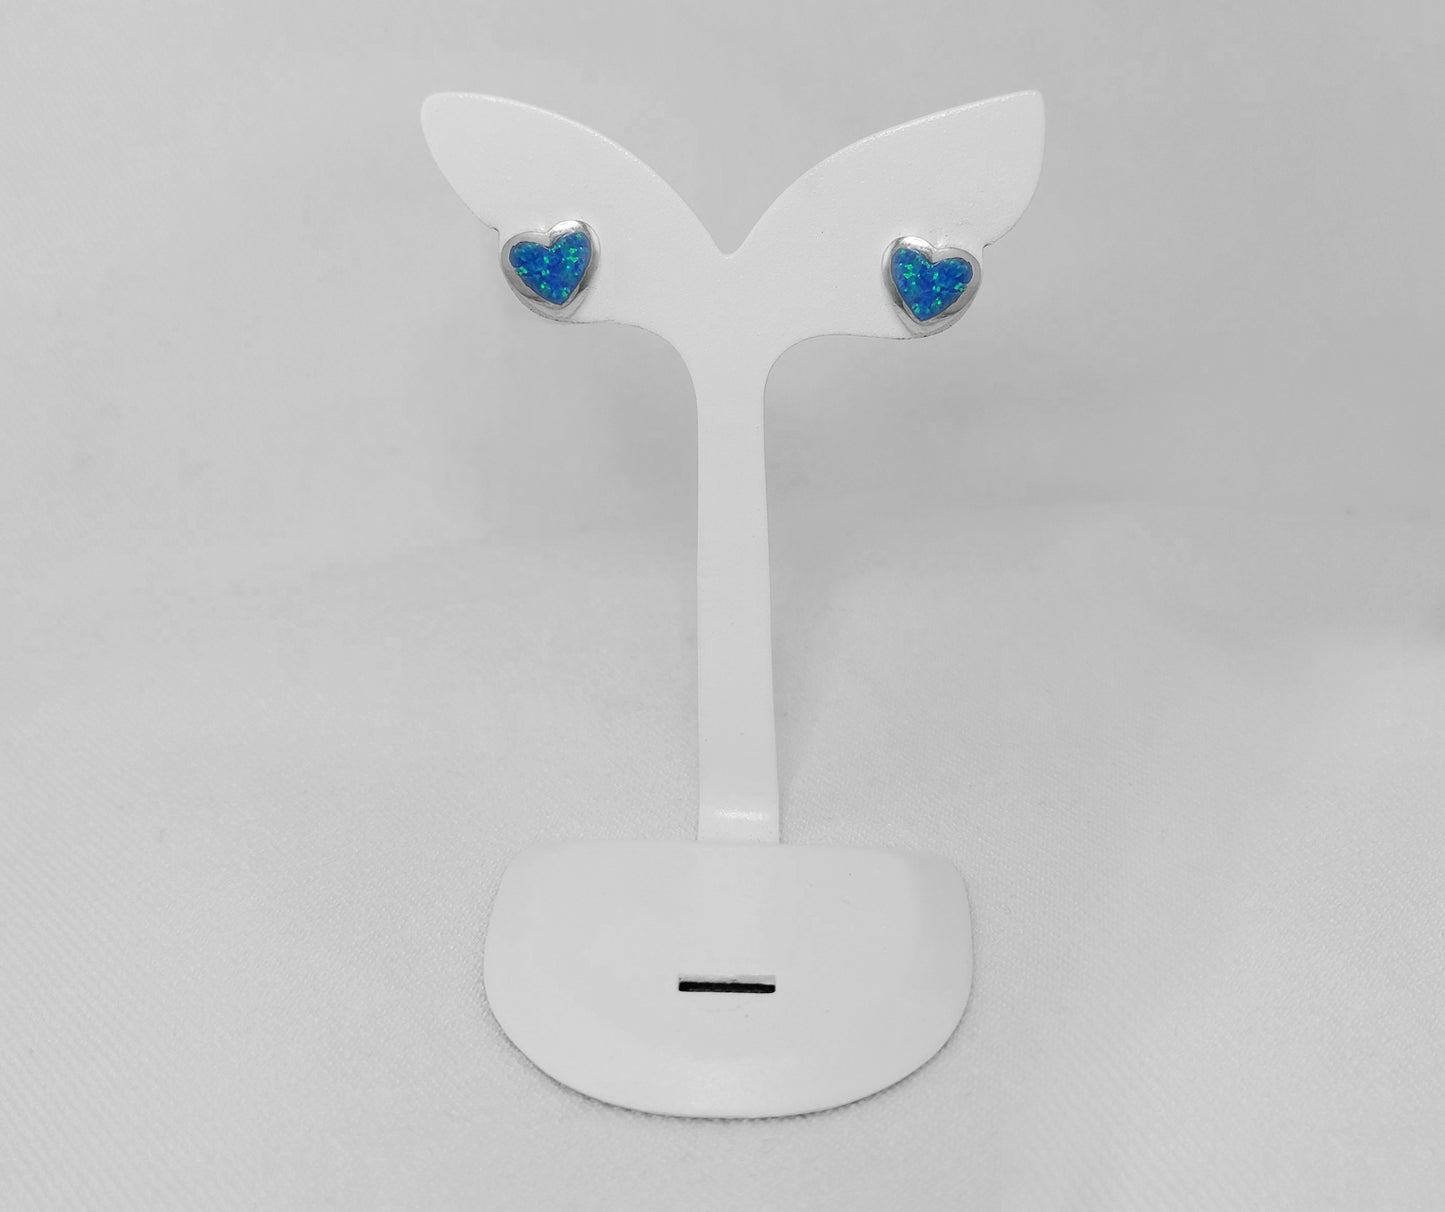 Blue Crushed Opal Heart Studs - Sterling Silver